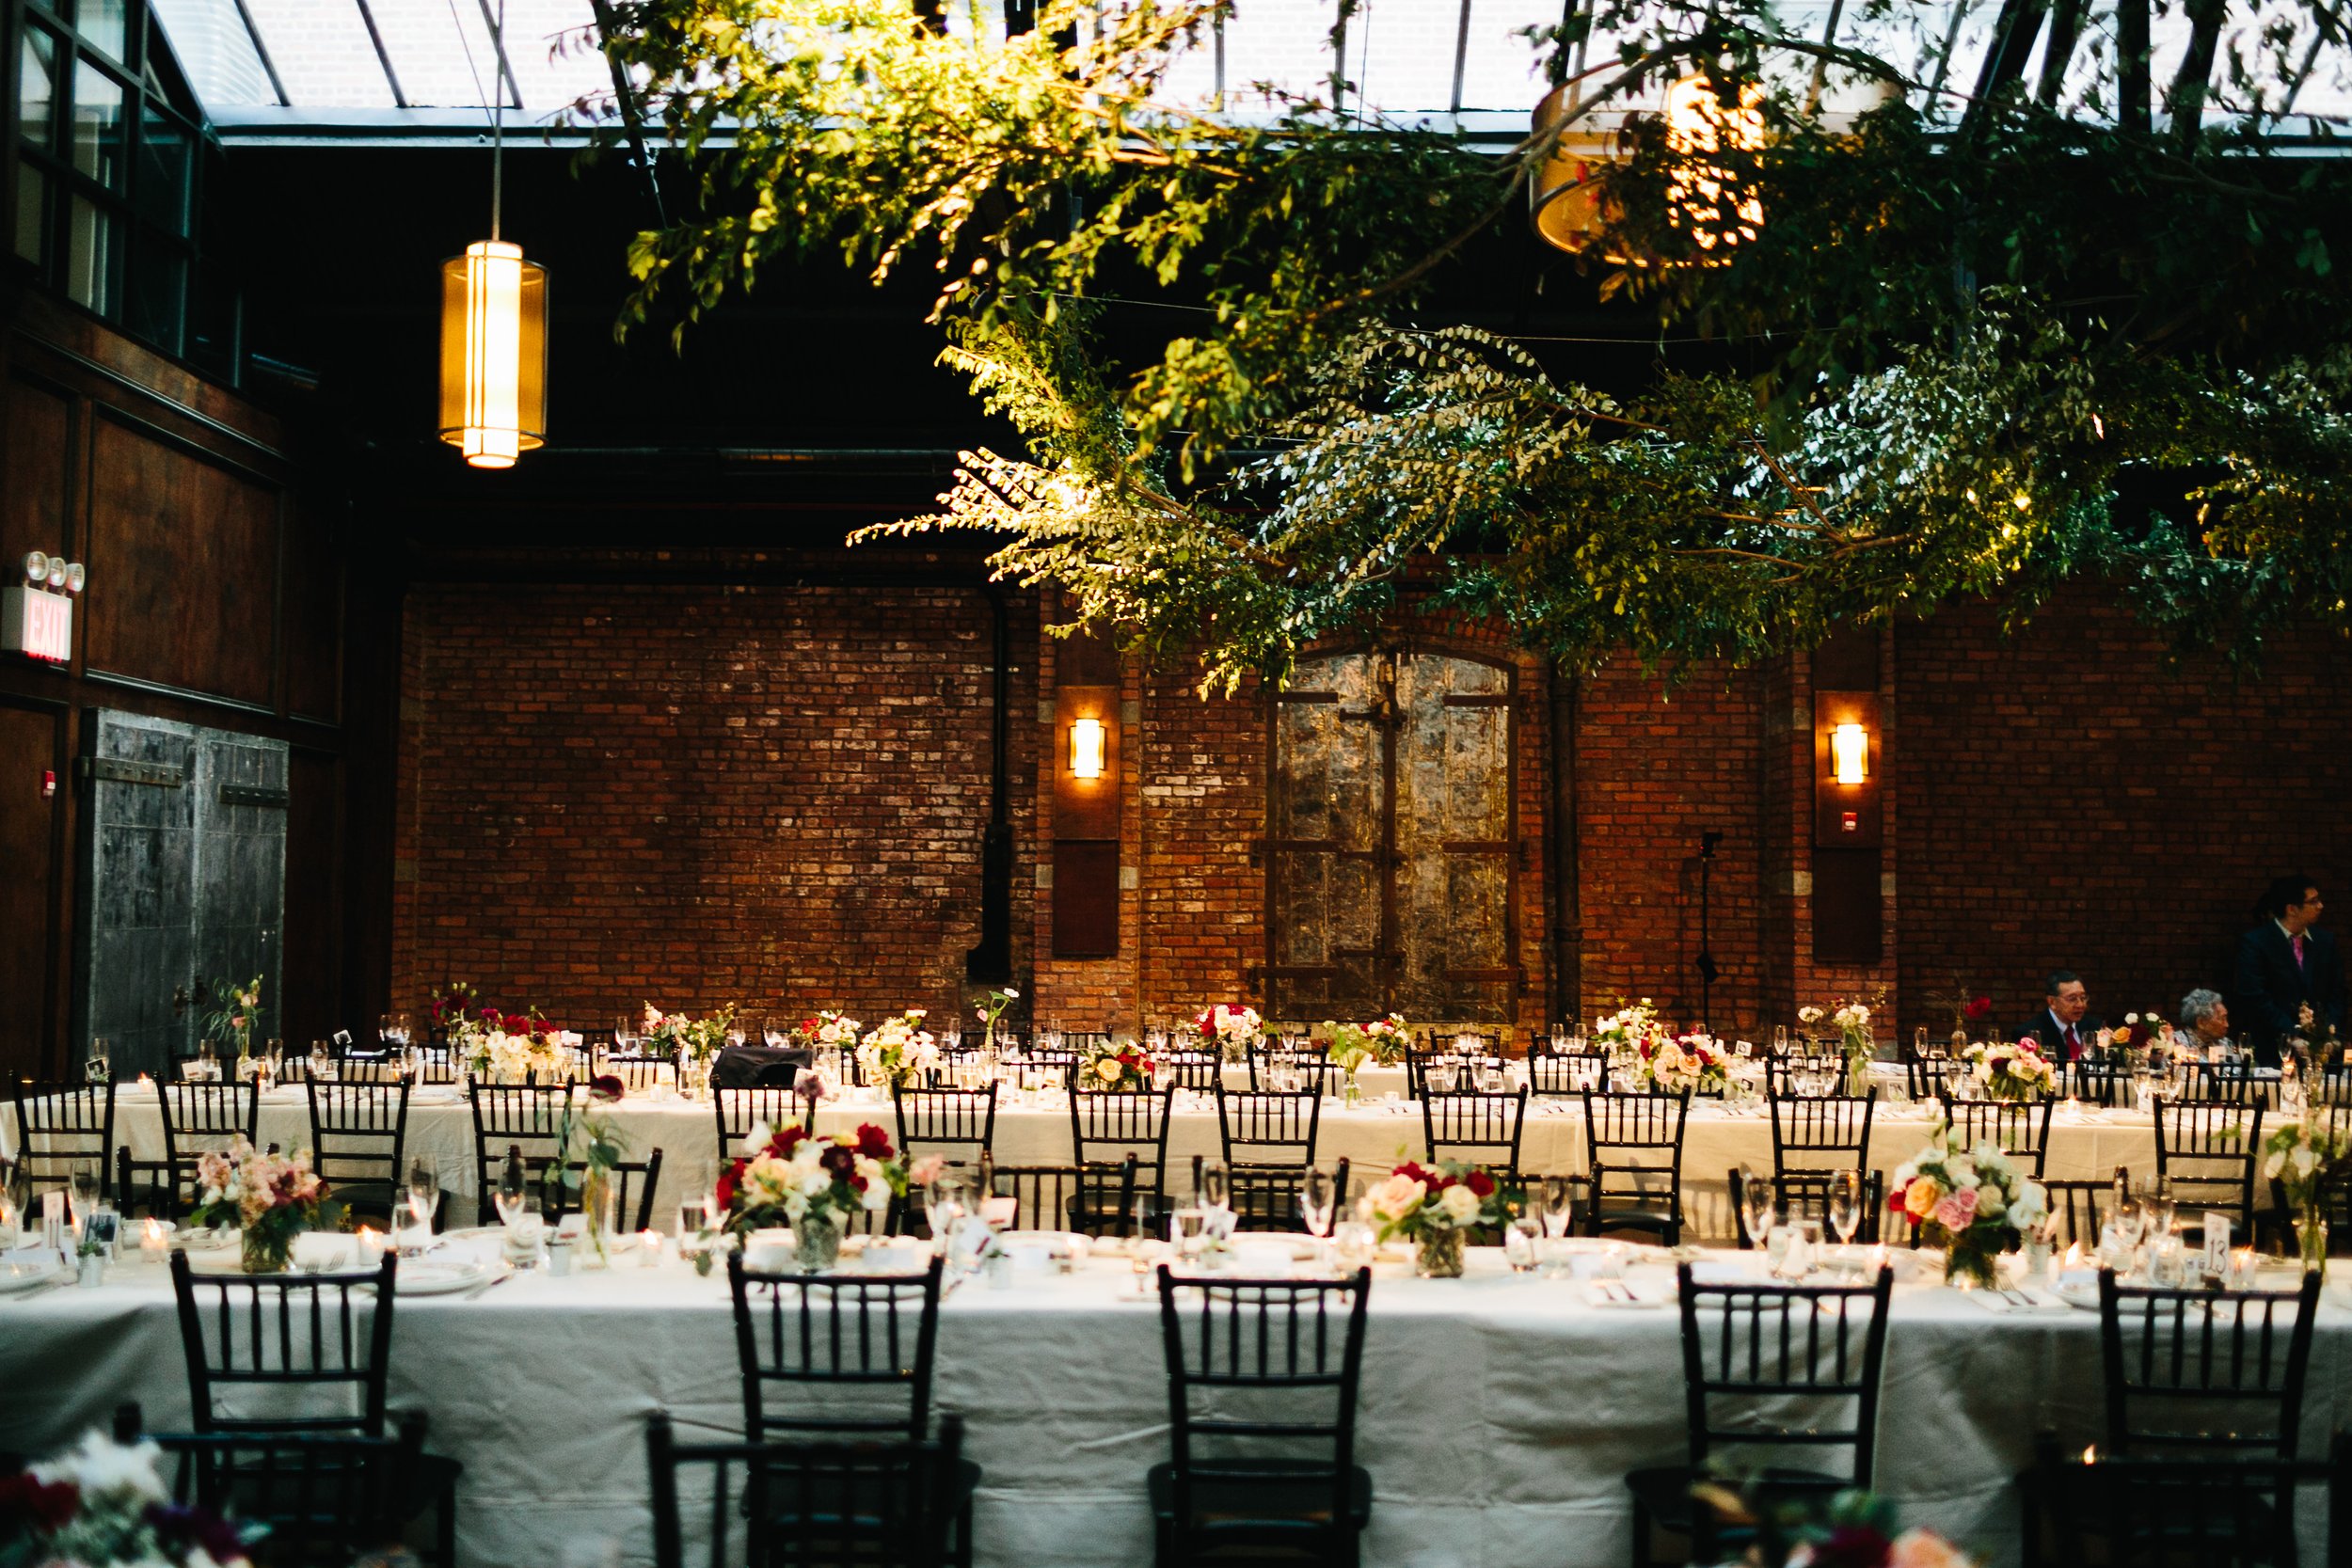 Wedding reception hall with exposed brick, white linens, black chairs, and red flower centerpieces.